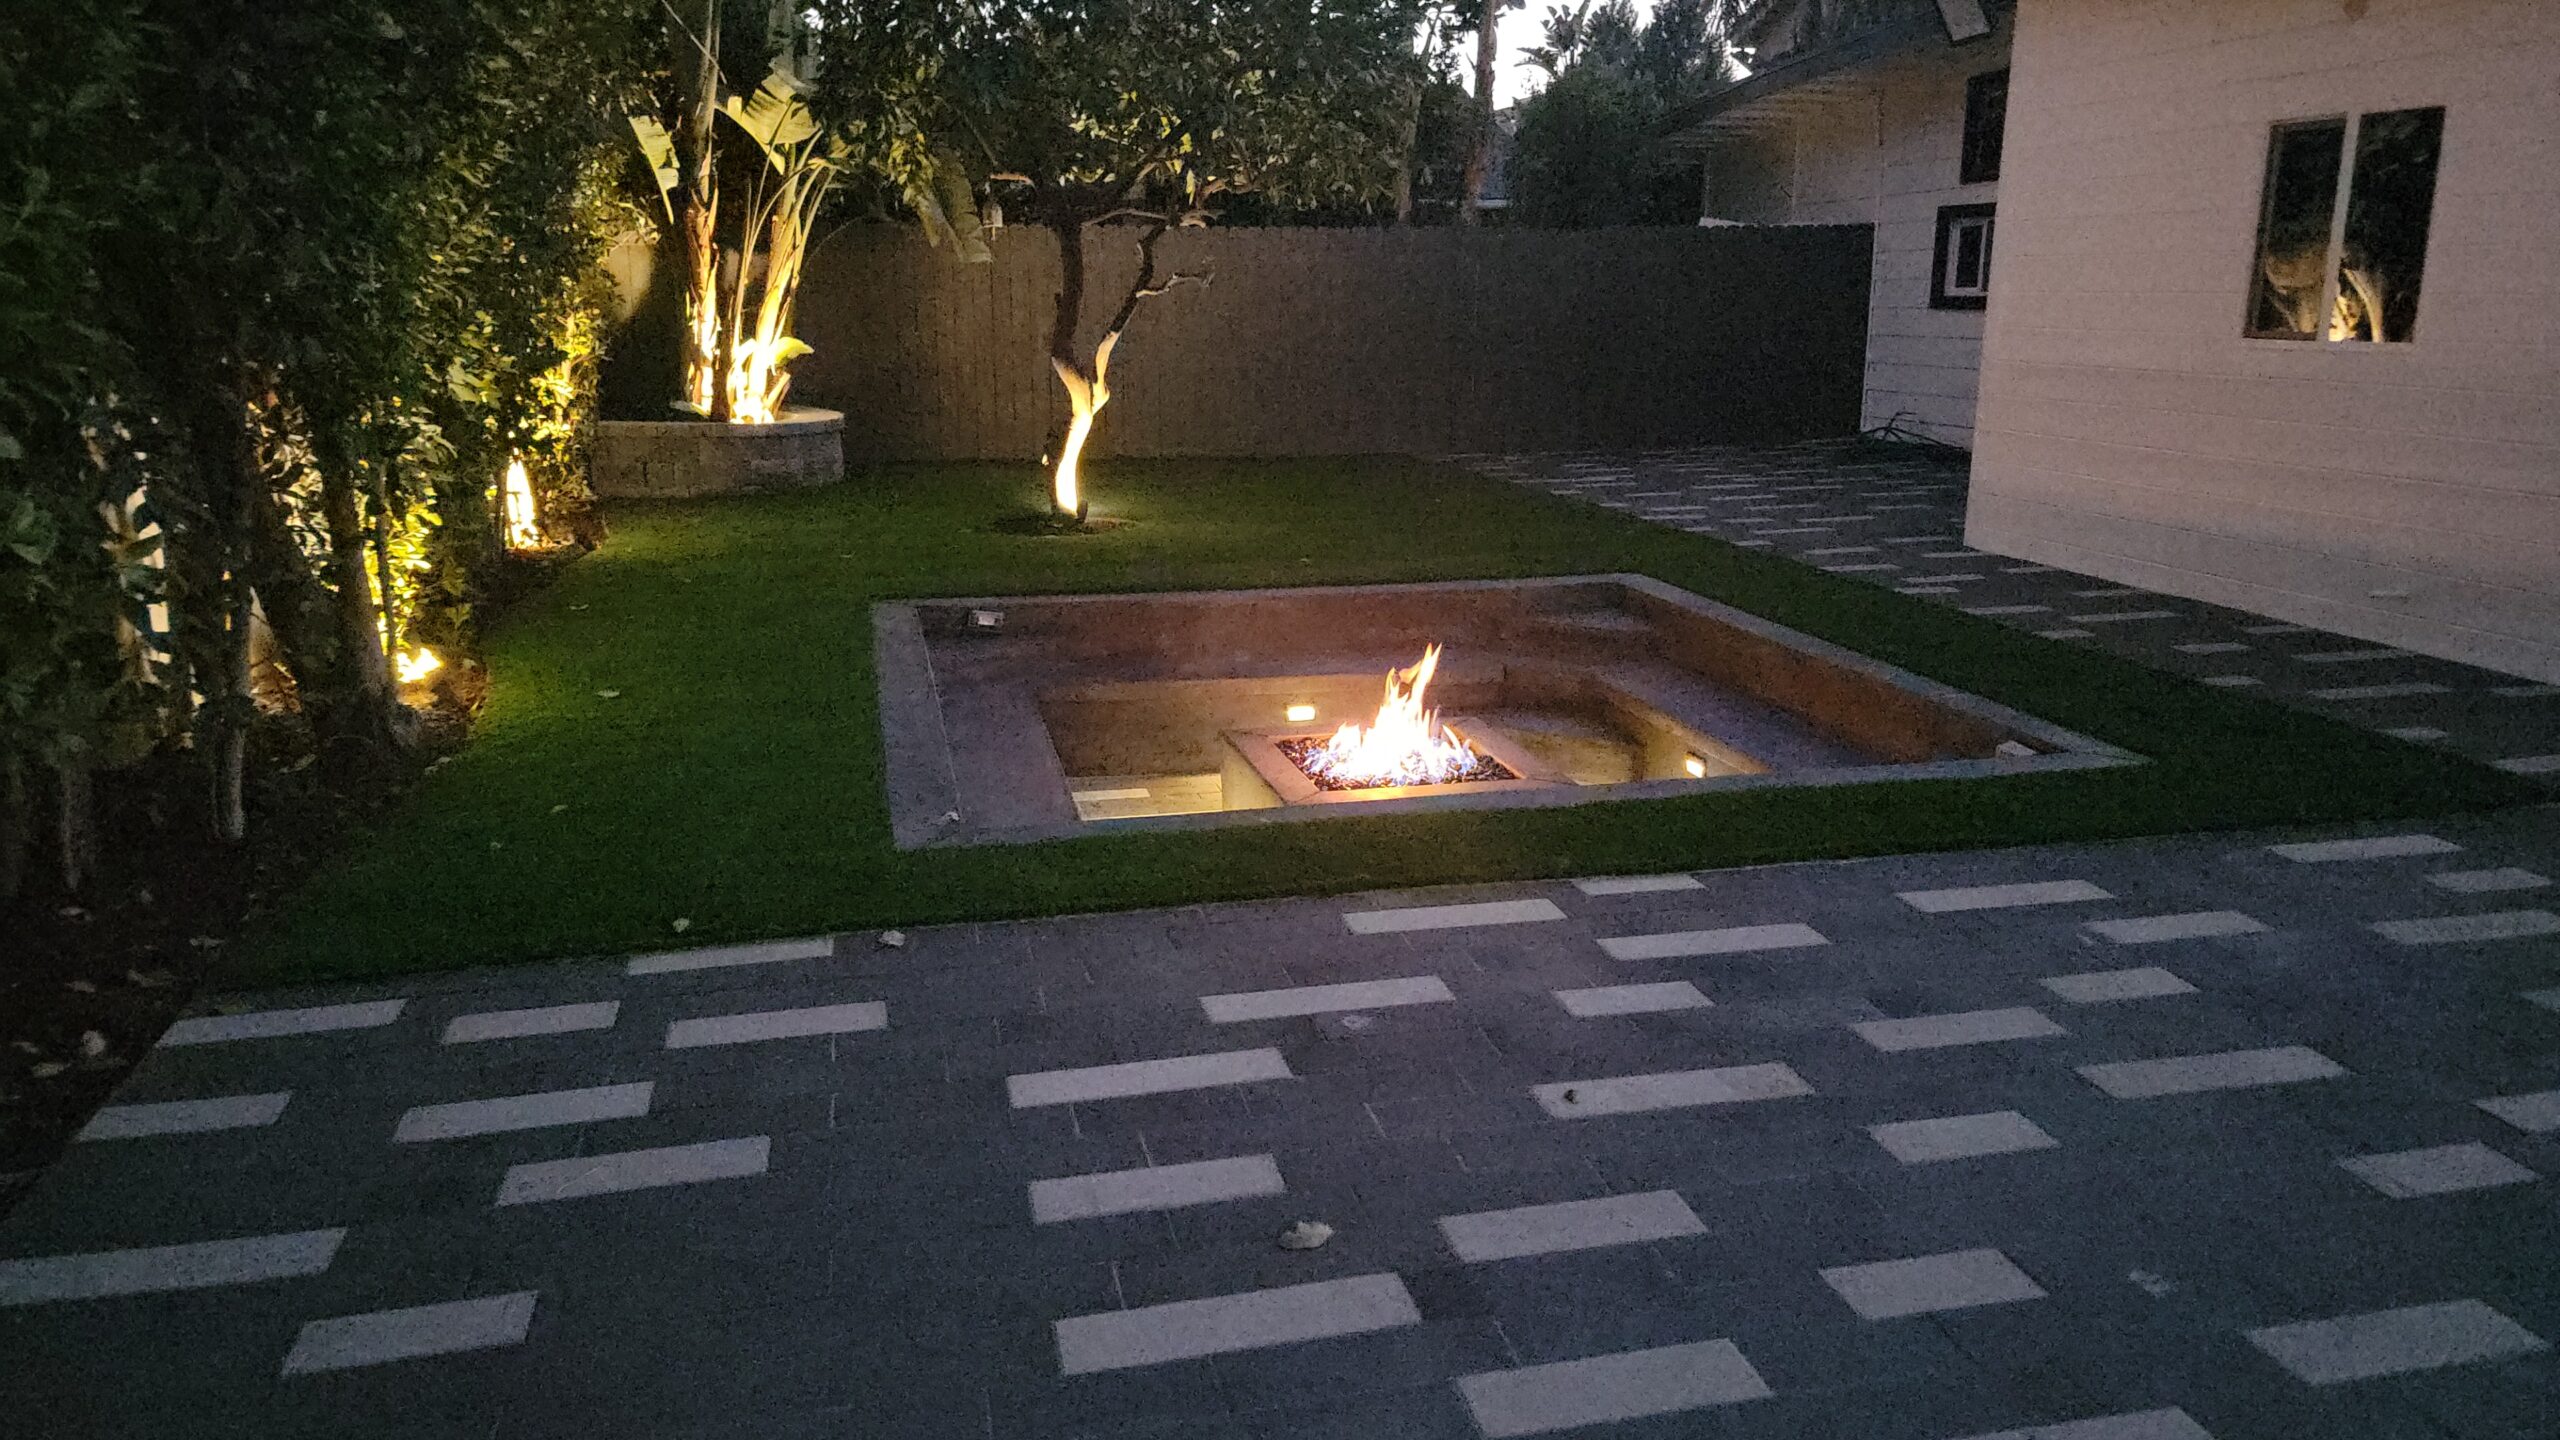 Backyard renovation including a fire pit, paver installation and patio in the los angeles area.